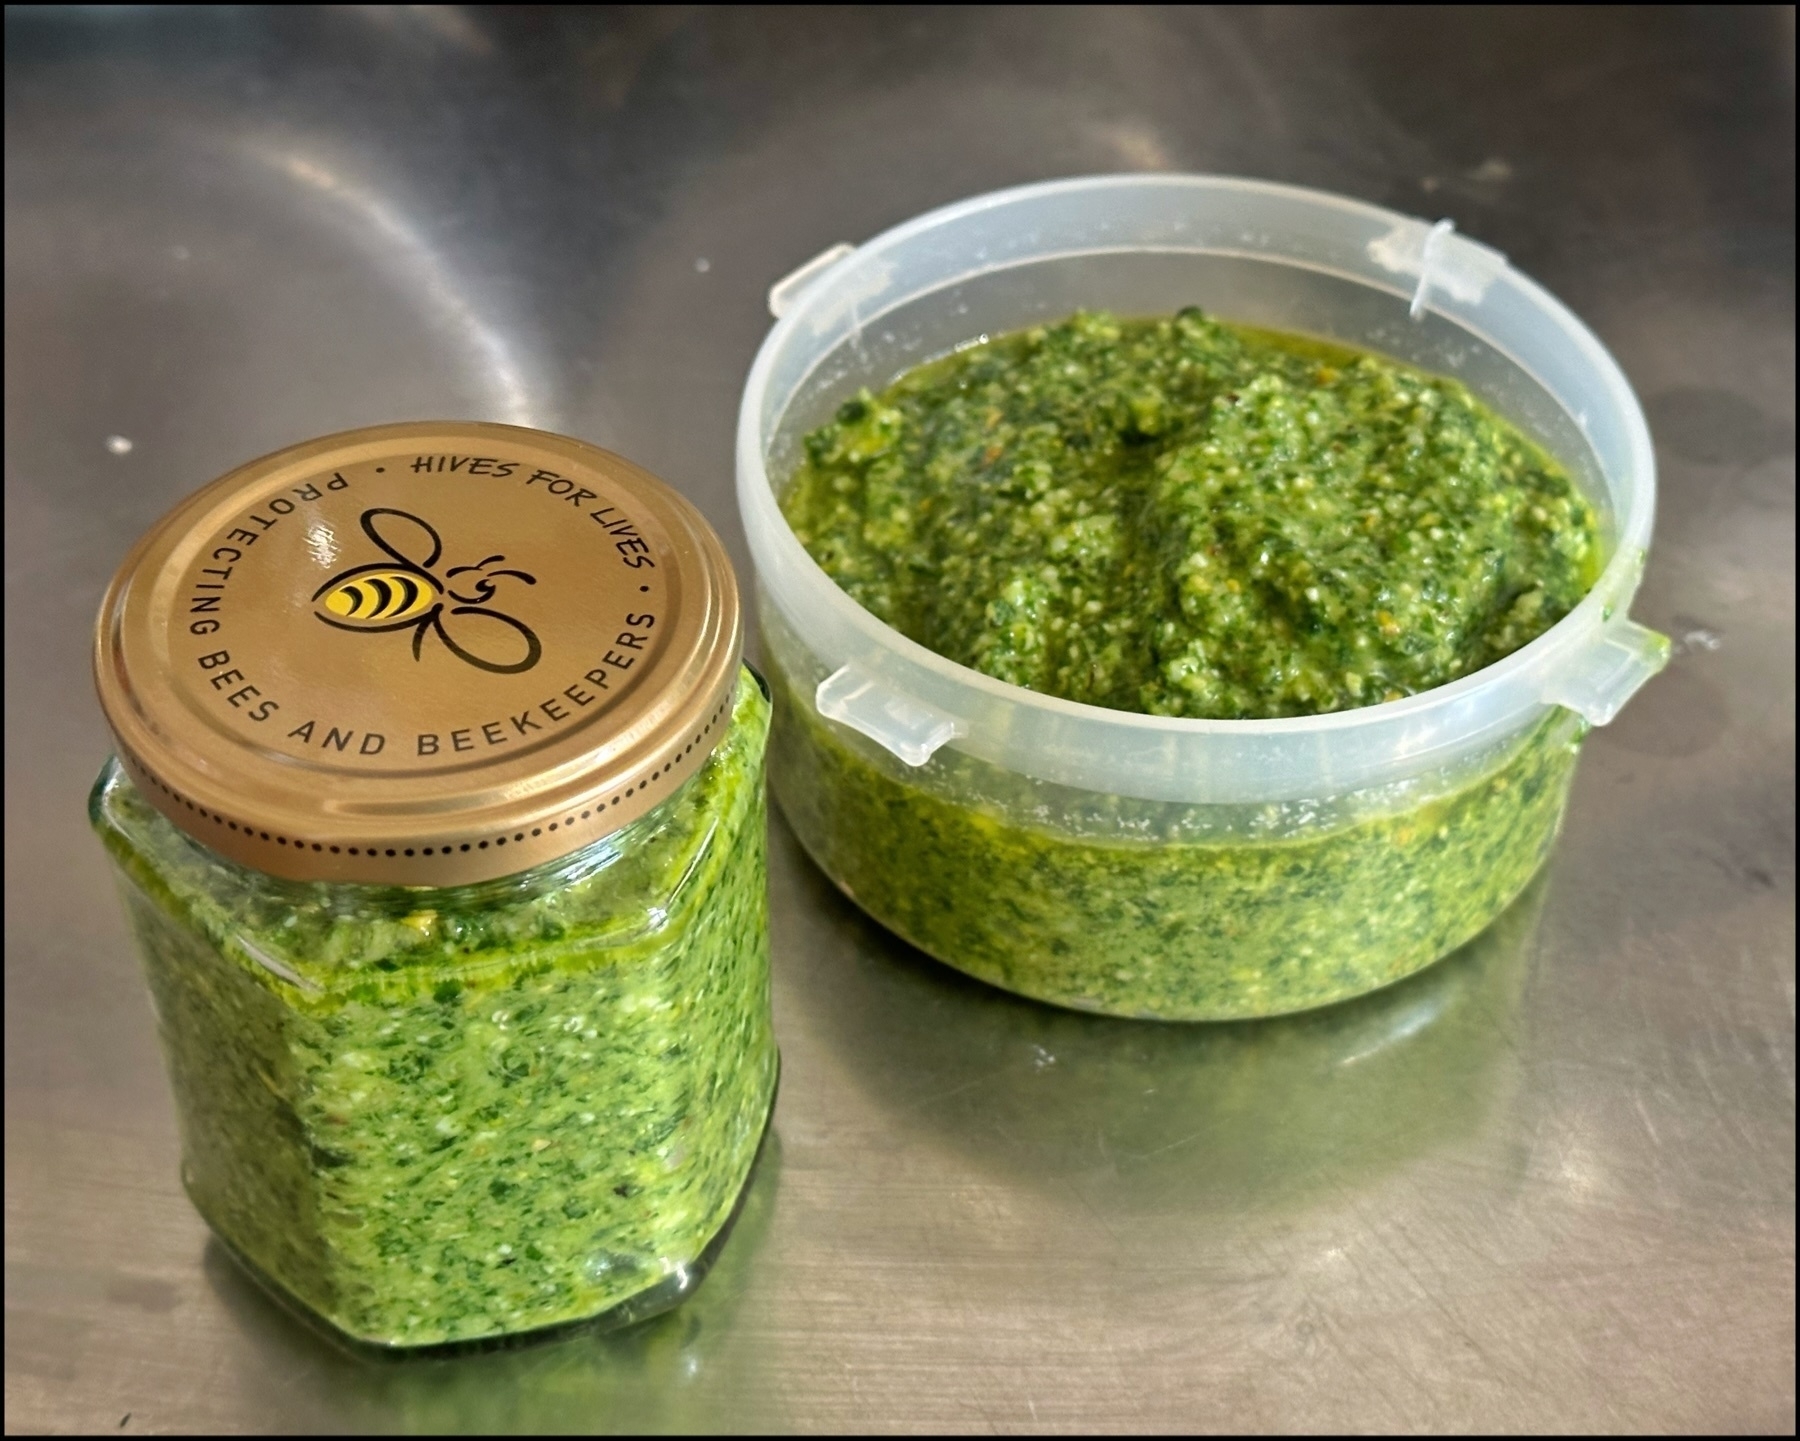 Jar of pesto with a bee-themed lid alongside an open plastic container of pesto on a stainless steel surface.